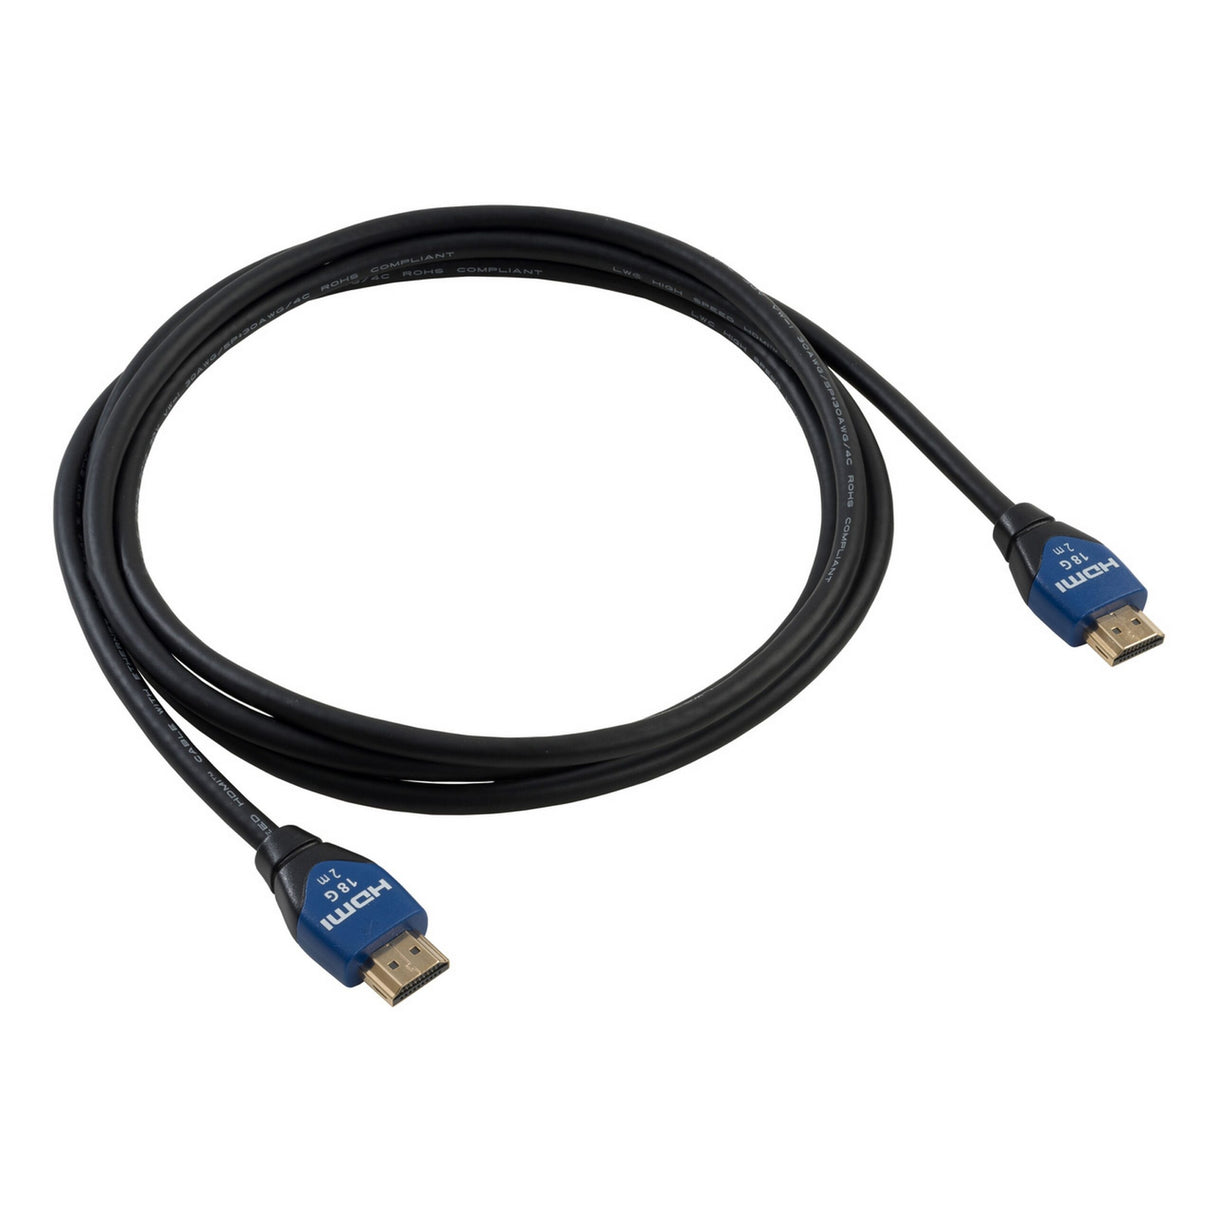 Liberty AV HALO-HC05M 5-Meter HALO Series High Speed HDMI Cable with Ethernet